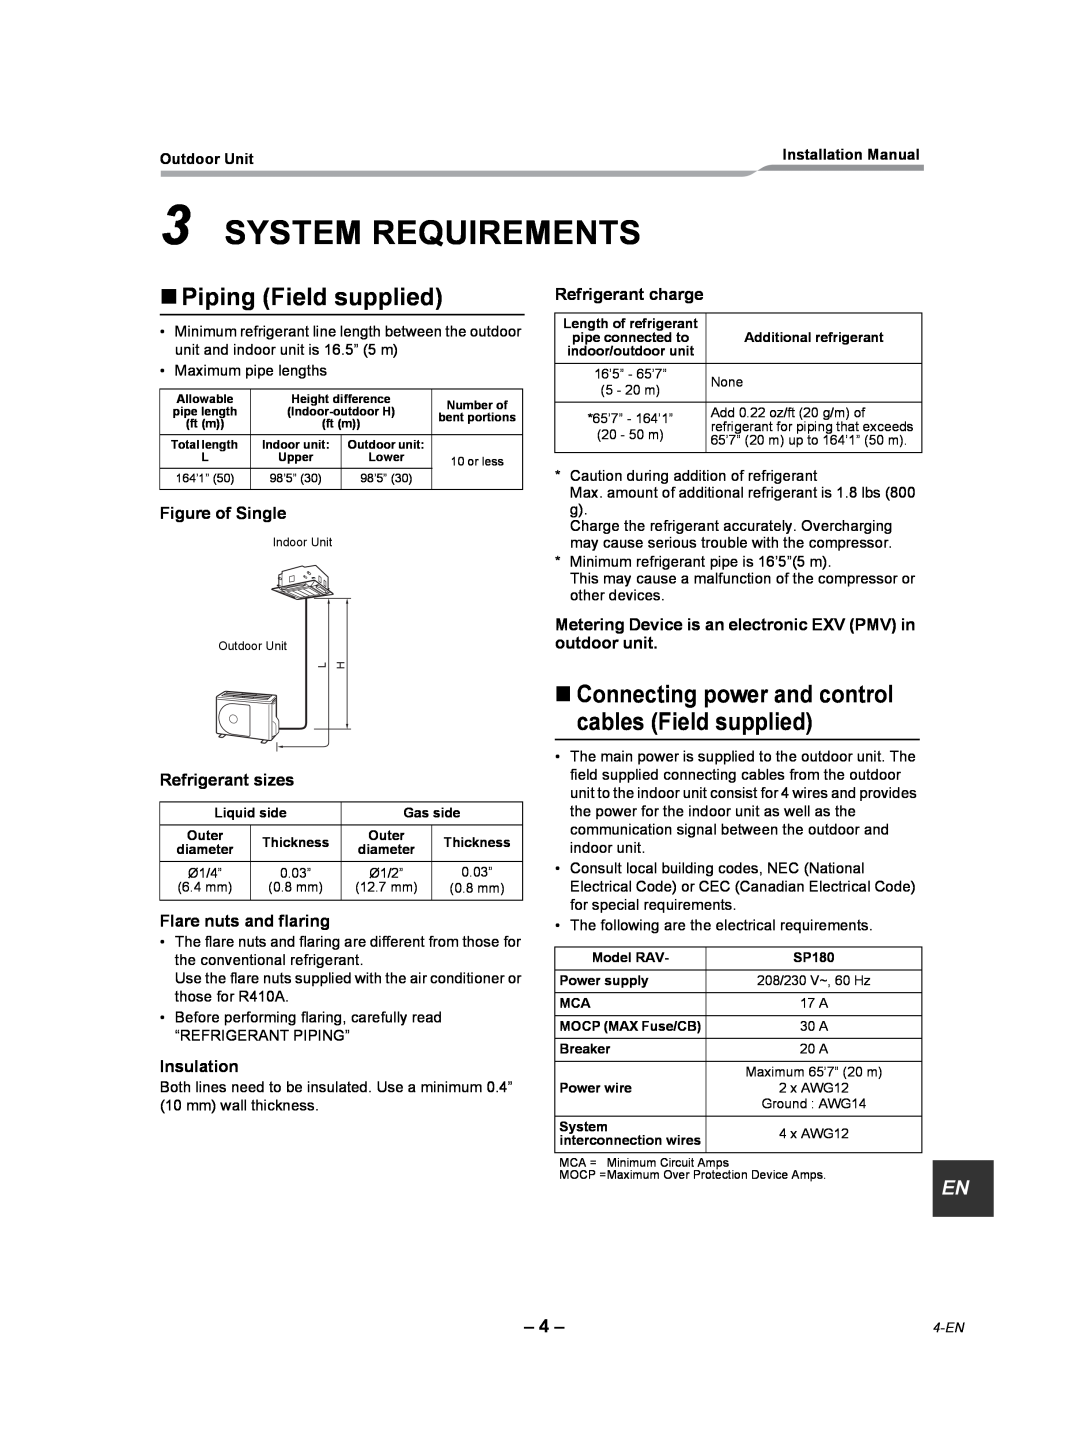 Toshiba RAV-SP180AT2-UL System Requirements, „Piping Field supplied, Figure of Single, Refrigerant charge, Insulation 